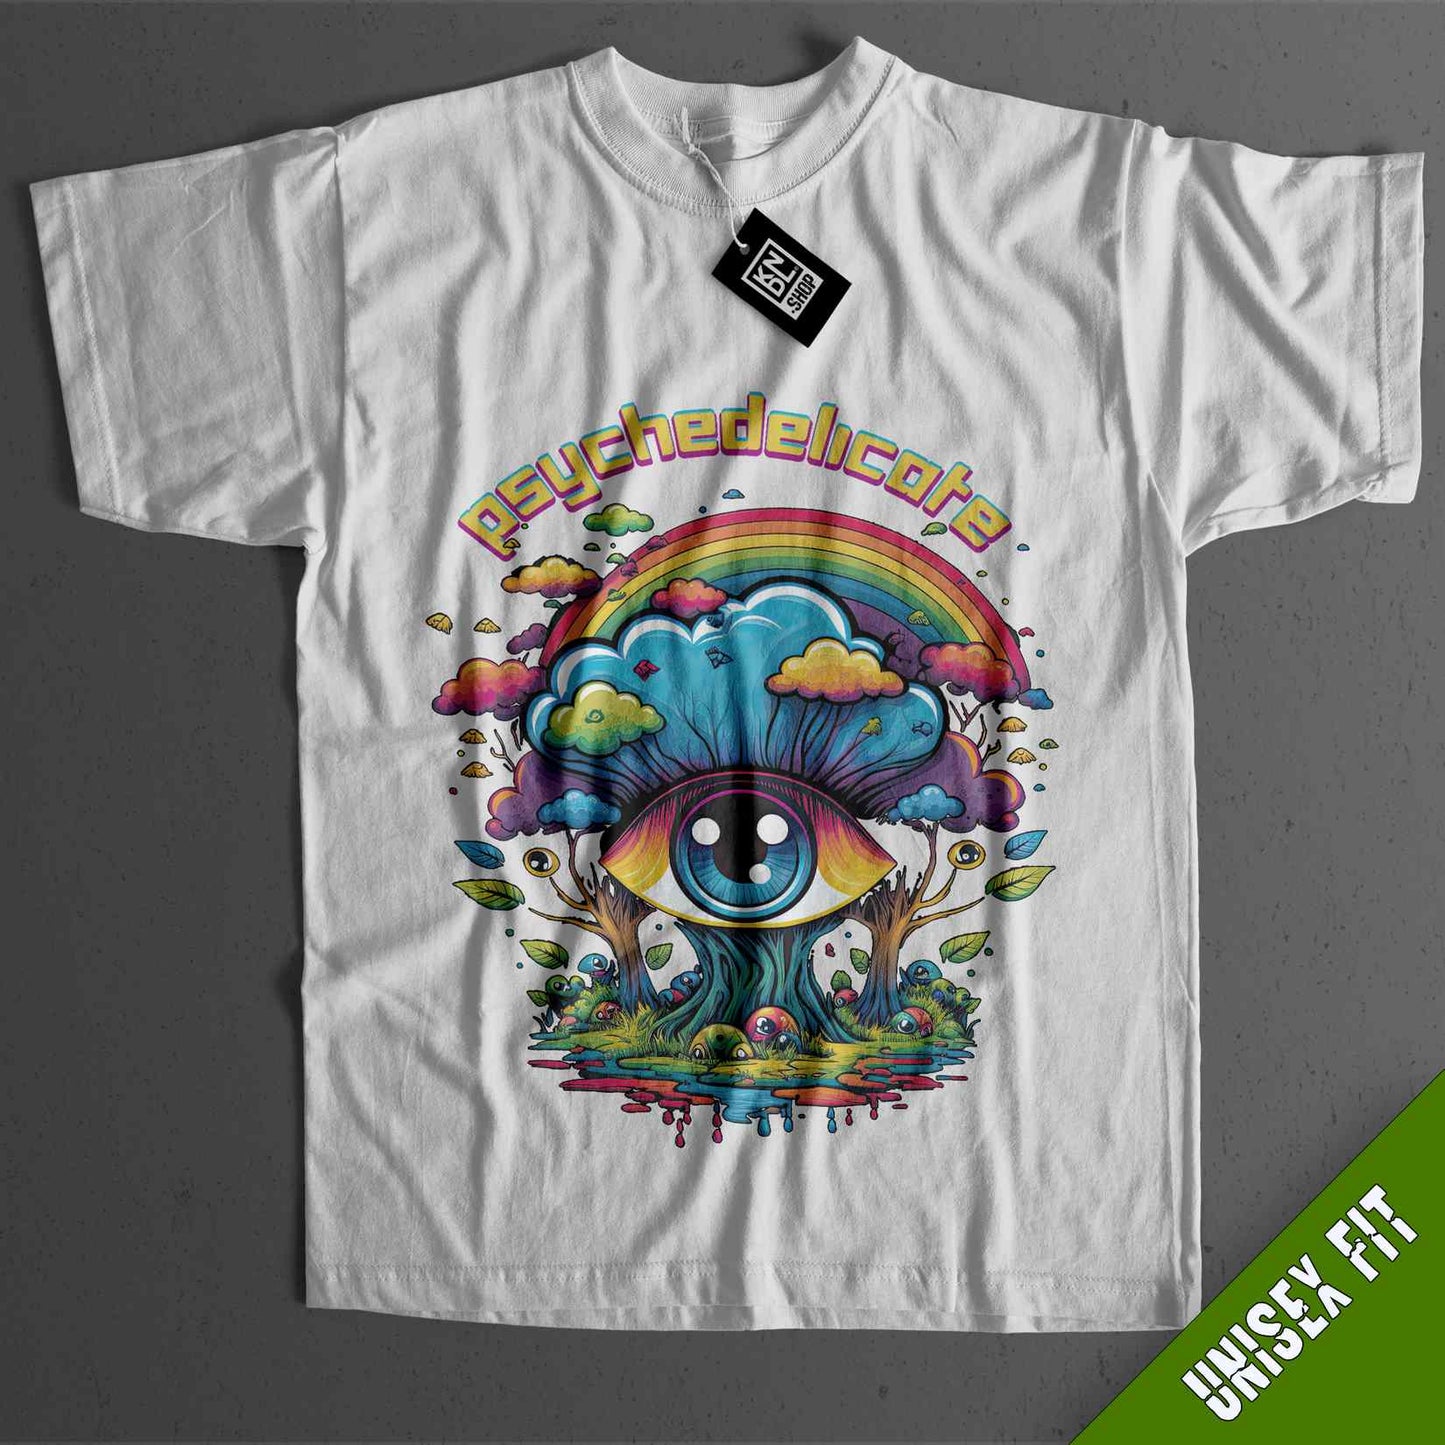 a white t - shirt with an image of an eye on it